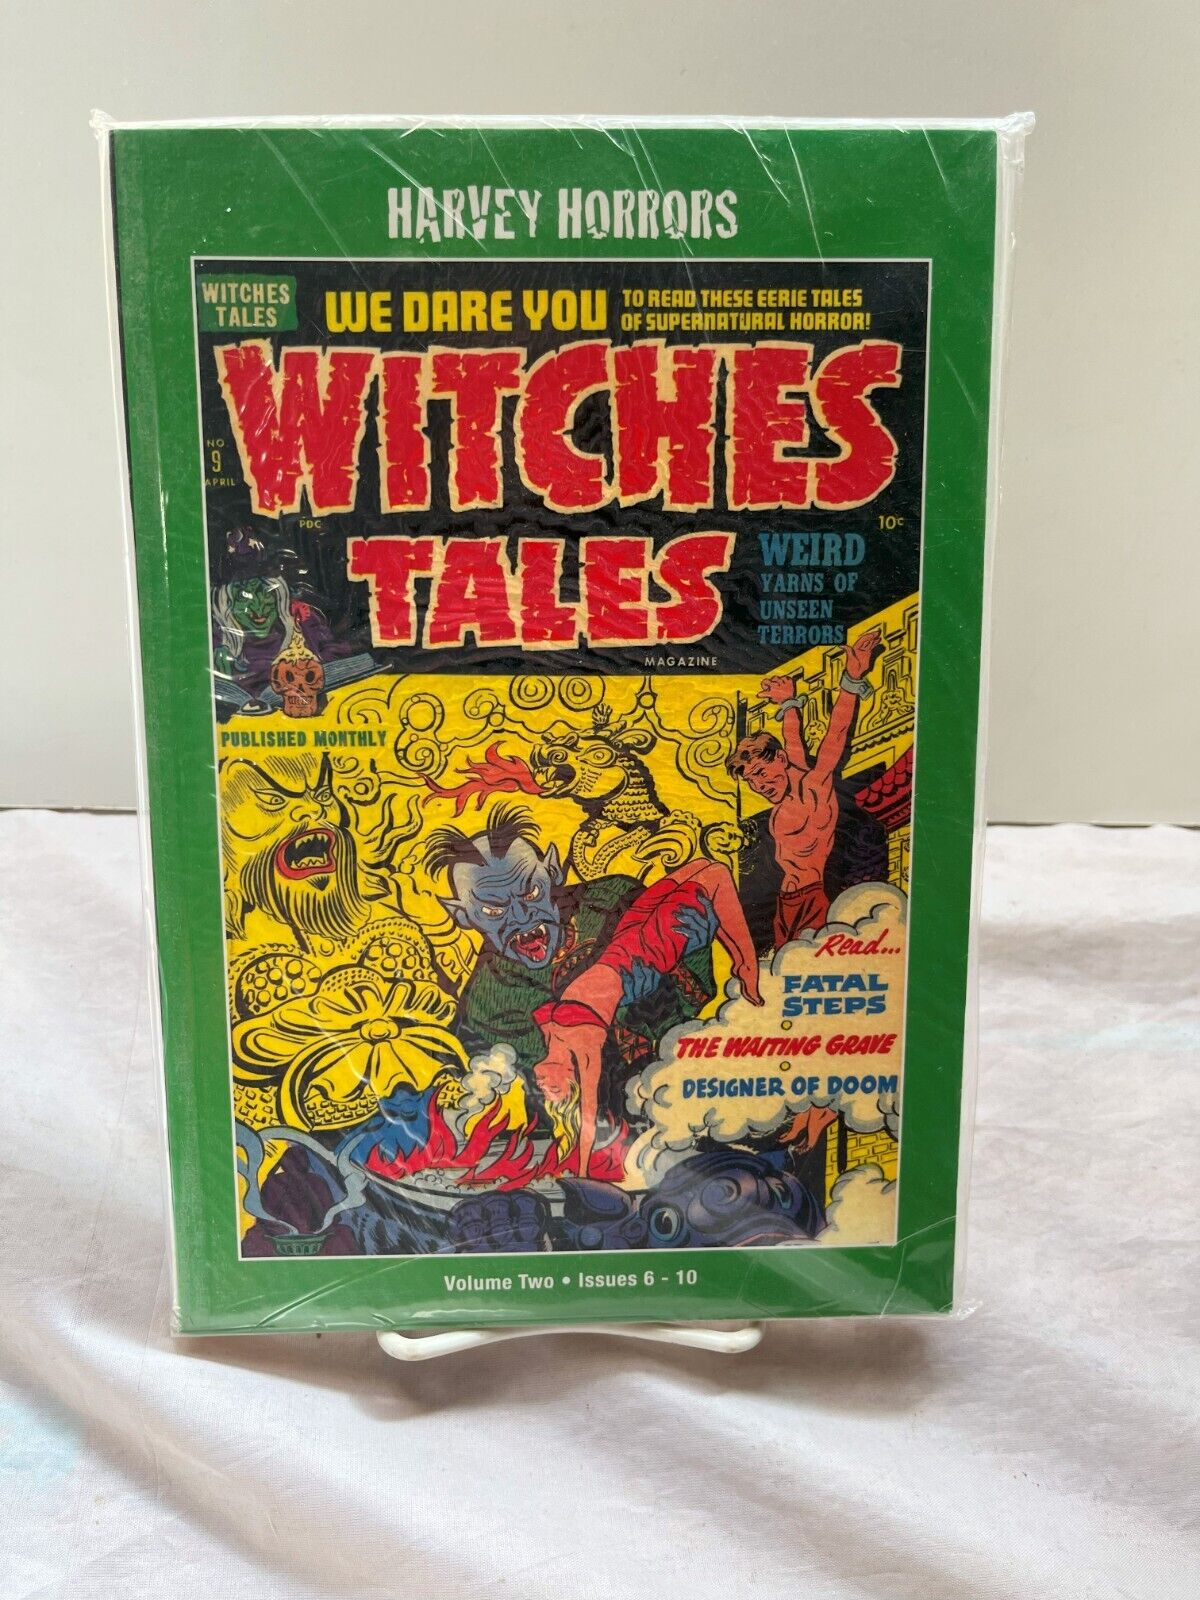 WITCHES TALES Harvey Horrors Volume 2 Issues #6-10 Softcover PS Artbooks